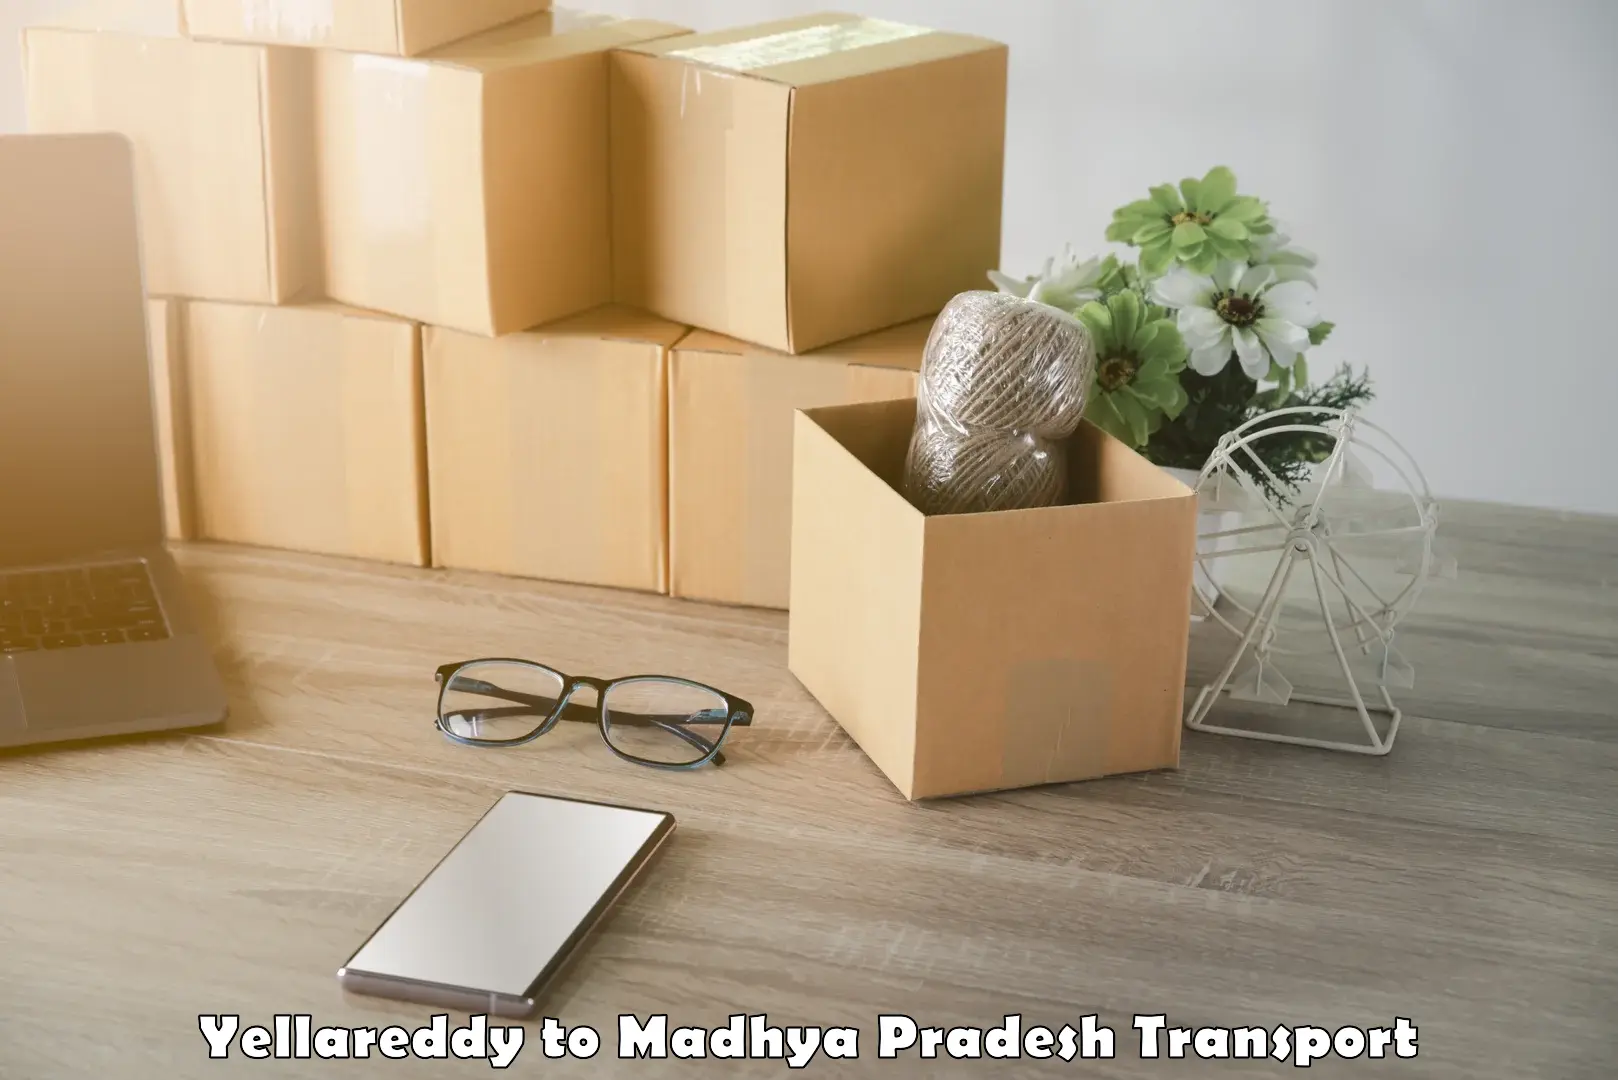 Container transportation services Yellareddy to Bajag